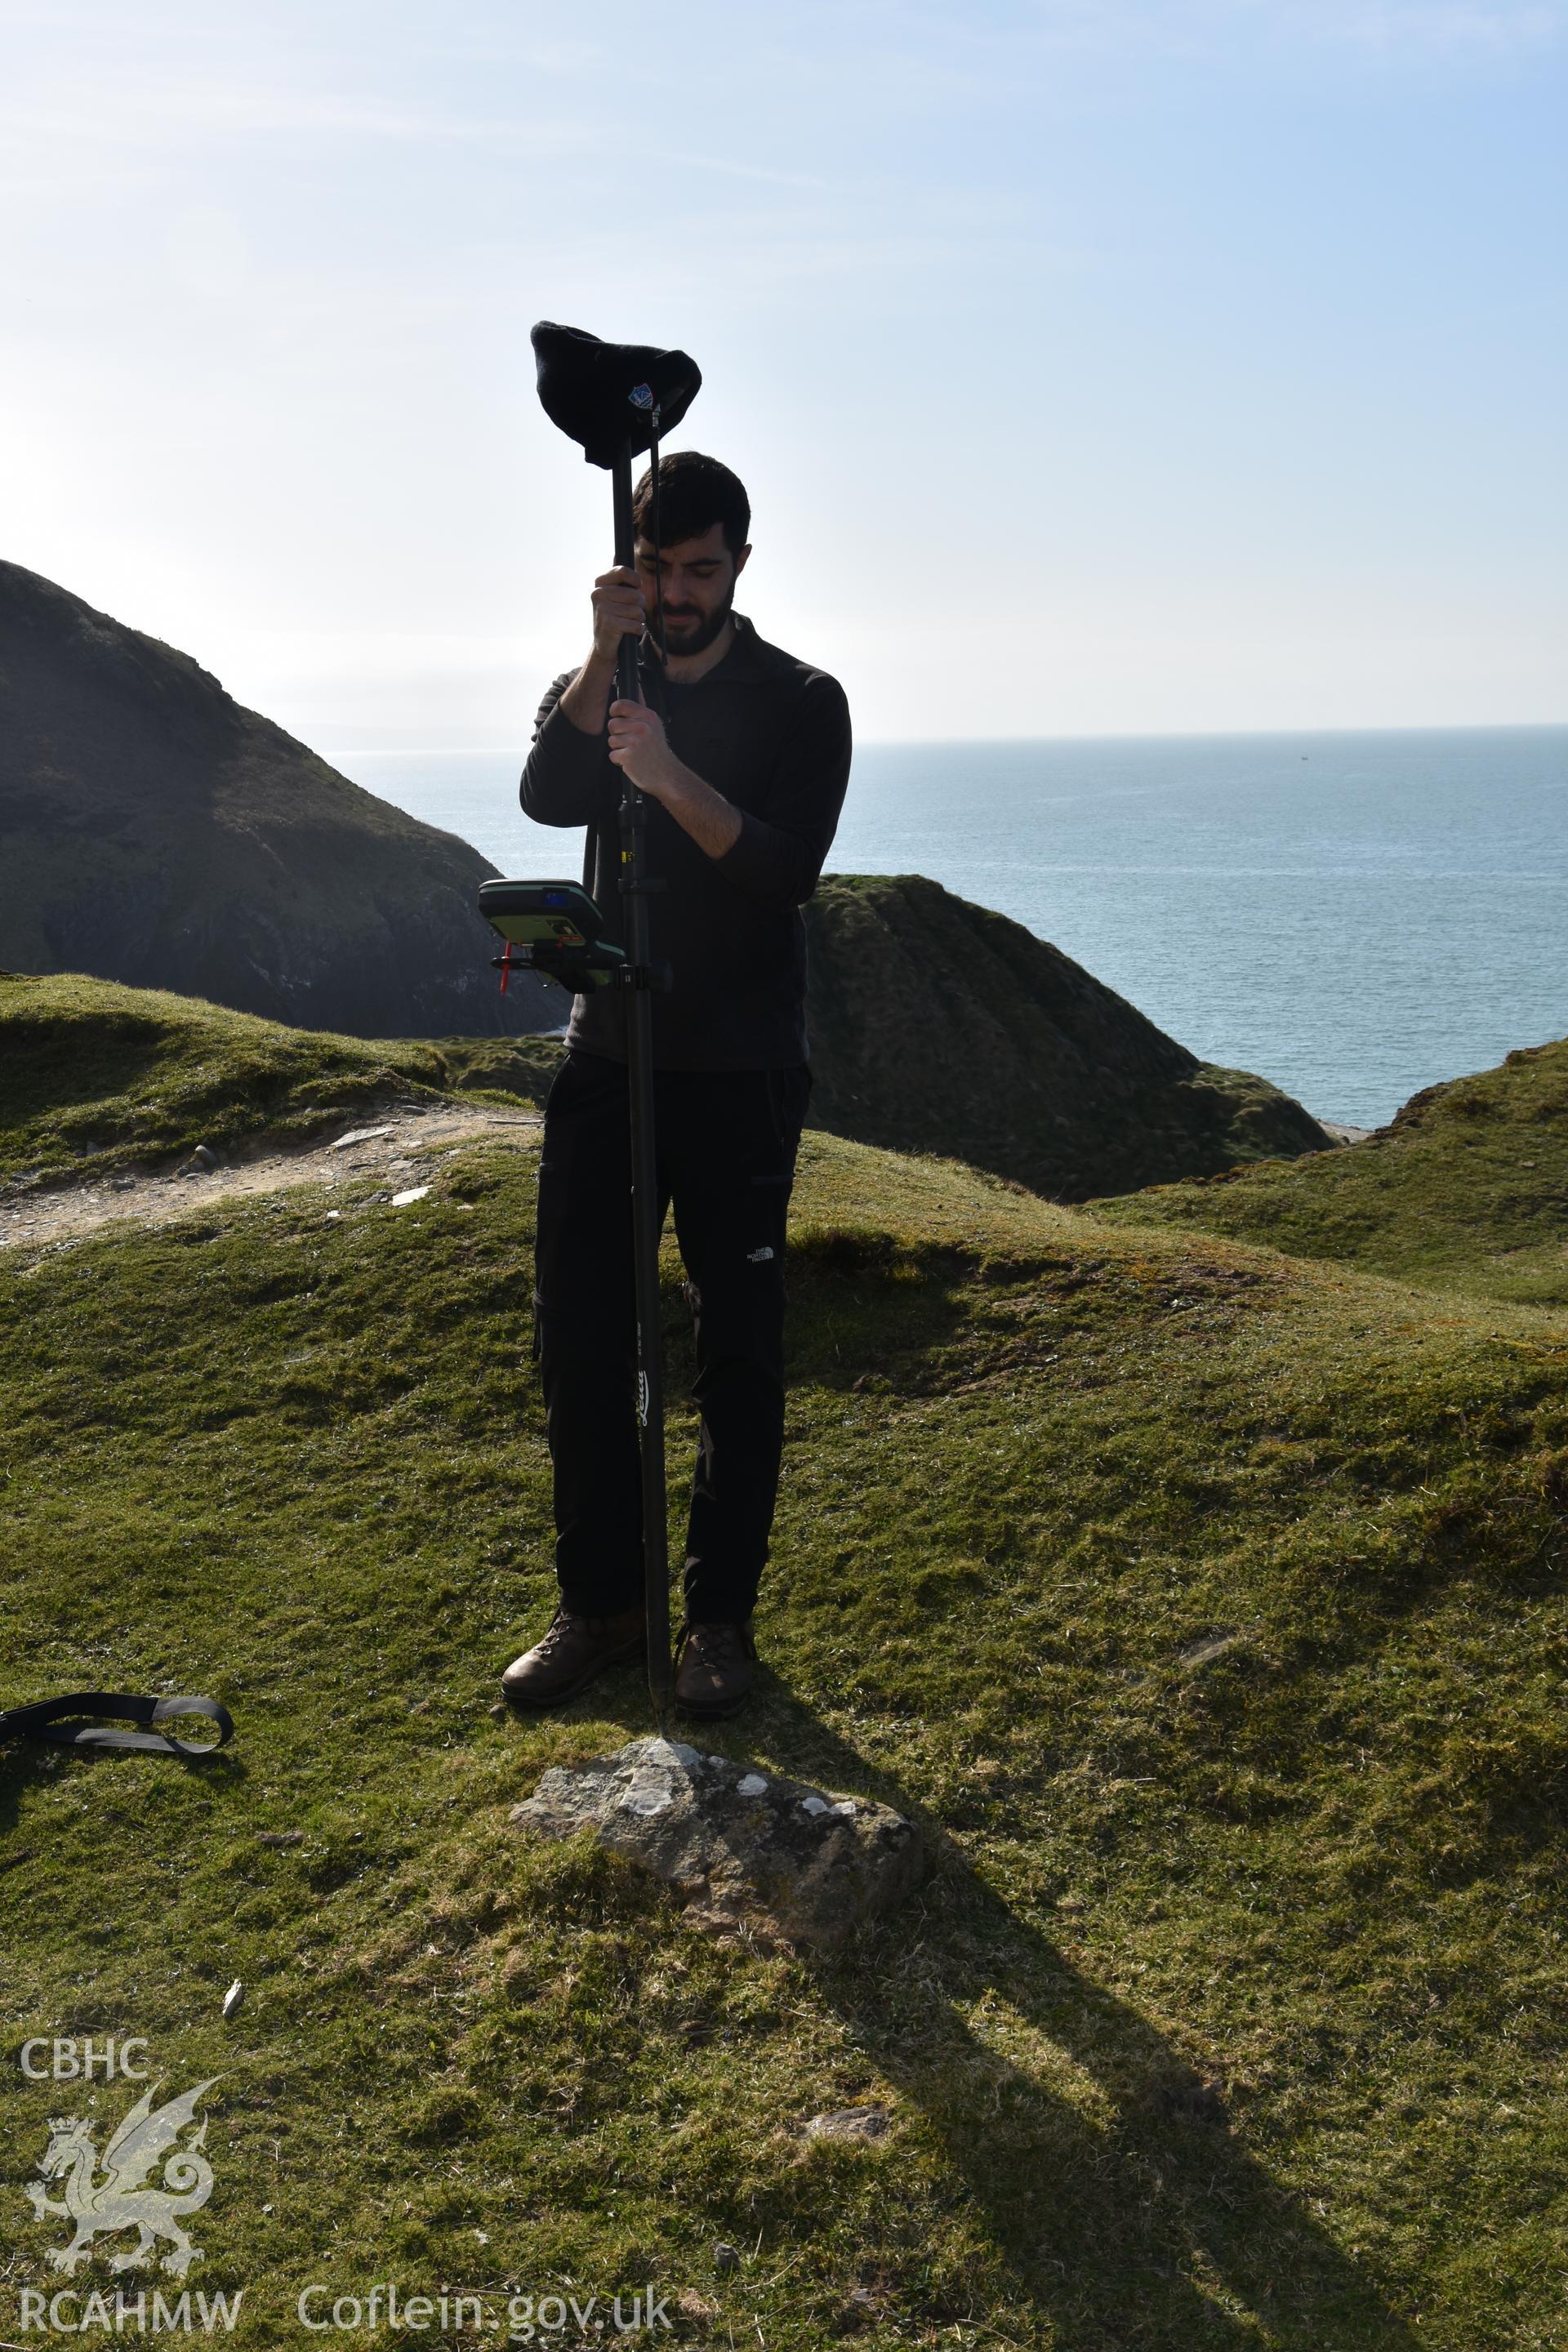 CHERISH project team measuring location of survey marker. From photographic survey of Castell Bach (NPRN 93914) by Dr Toby Driver for site monitoring 27/03/2019.
Produced with EU funds through the Ireland Wales Co-operation Programme 2014-2020. All material made freely available through the Open Government Licence.